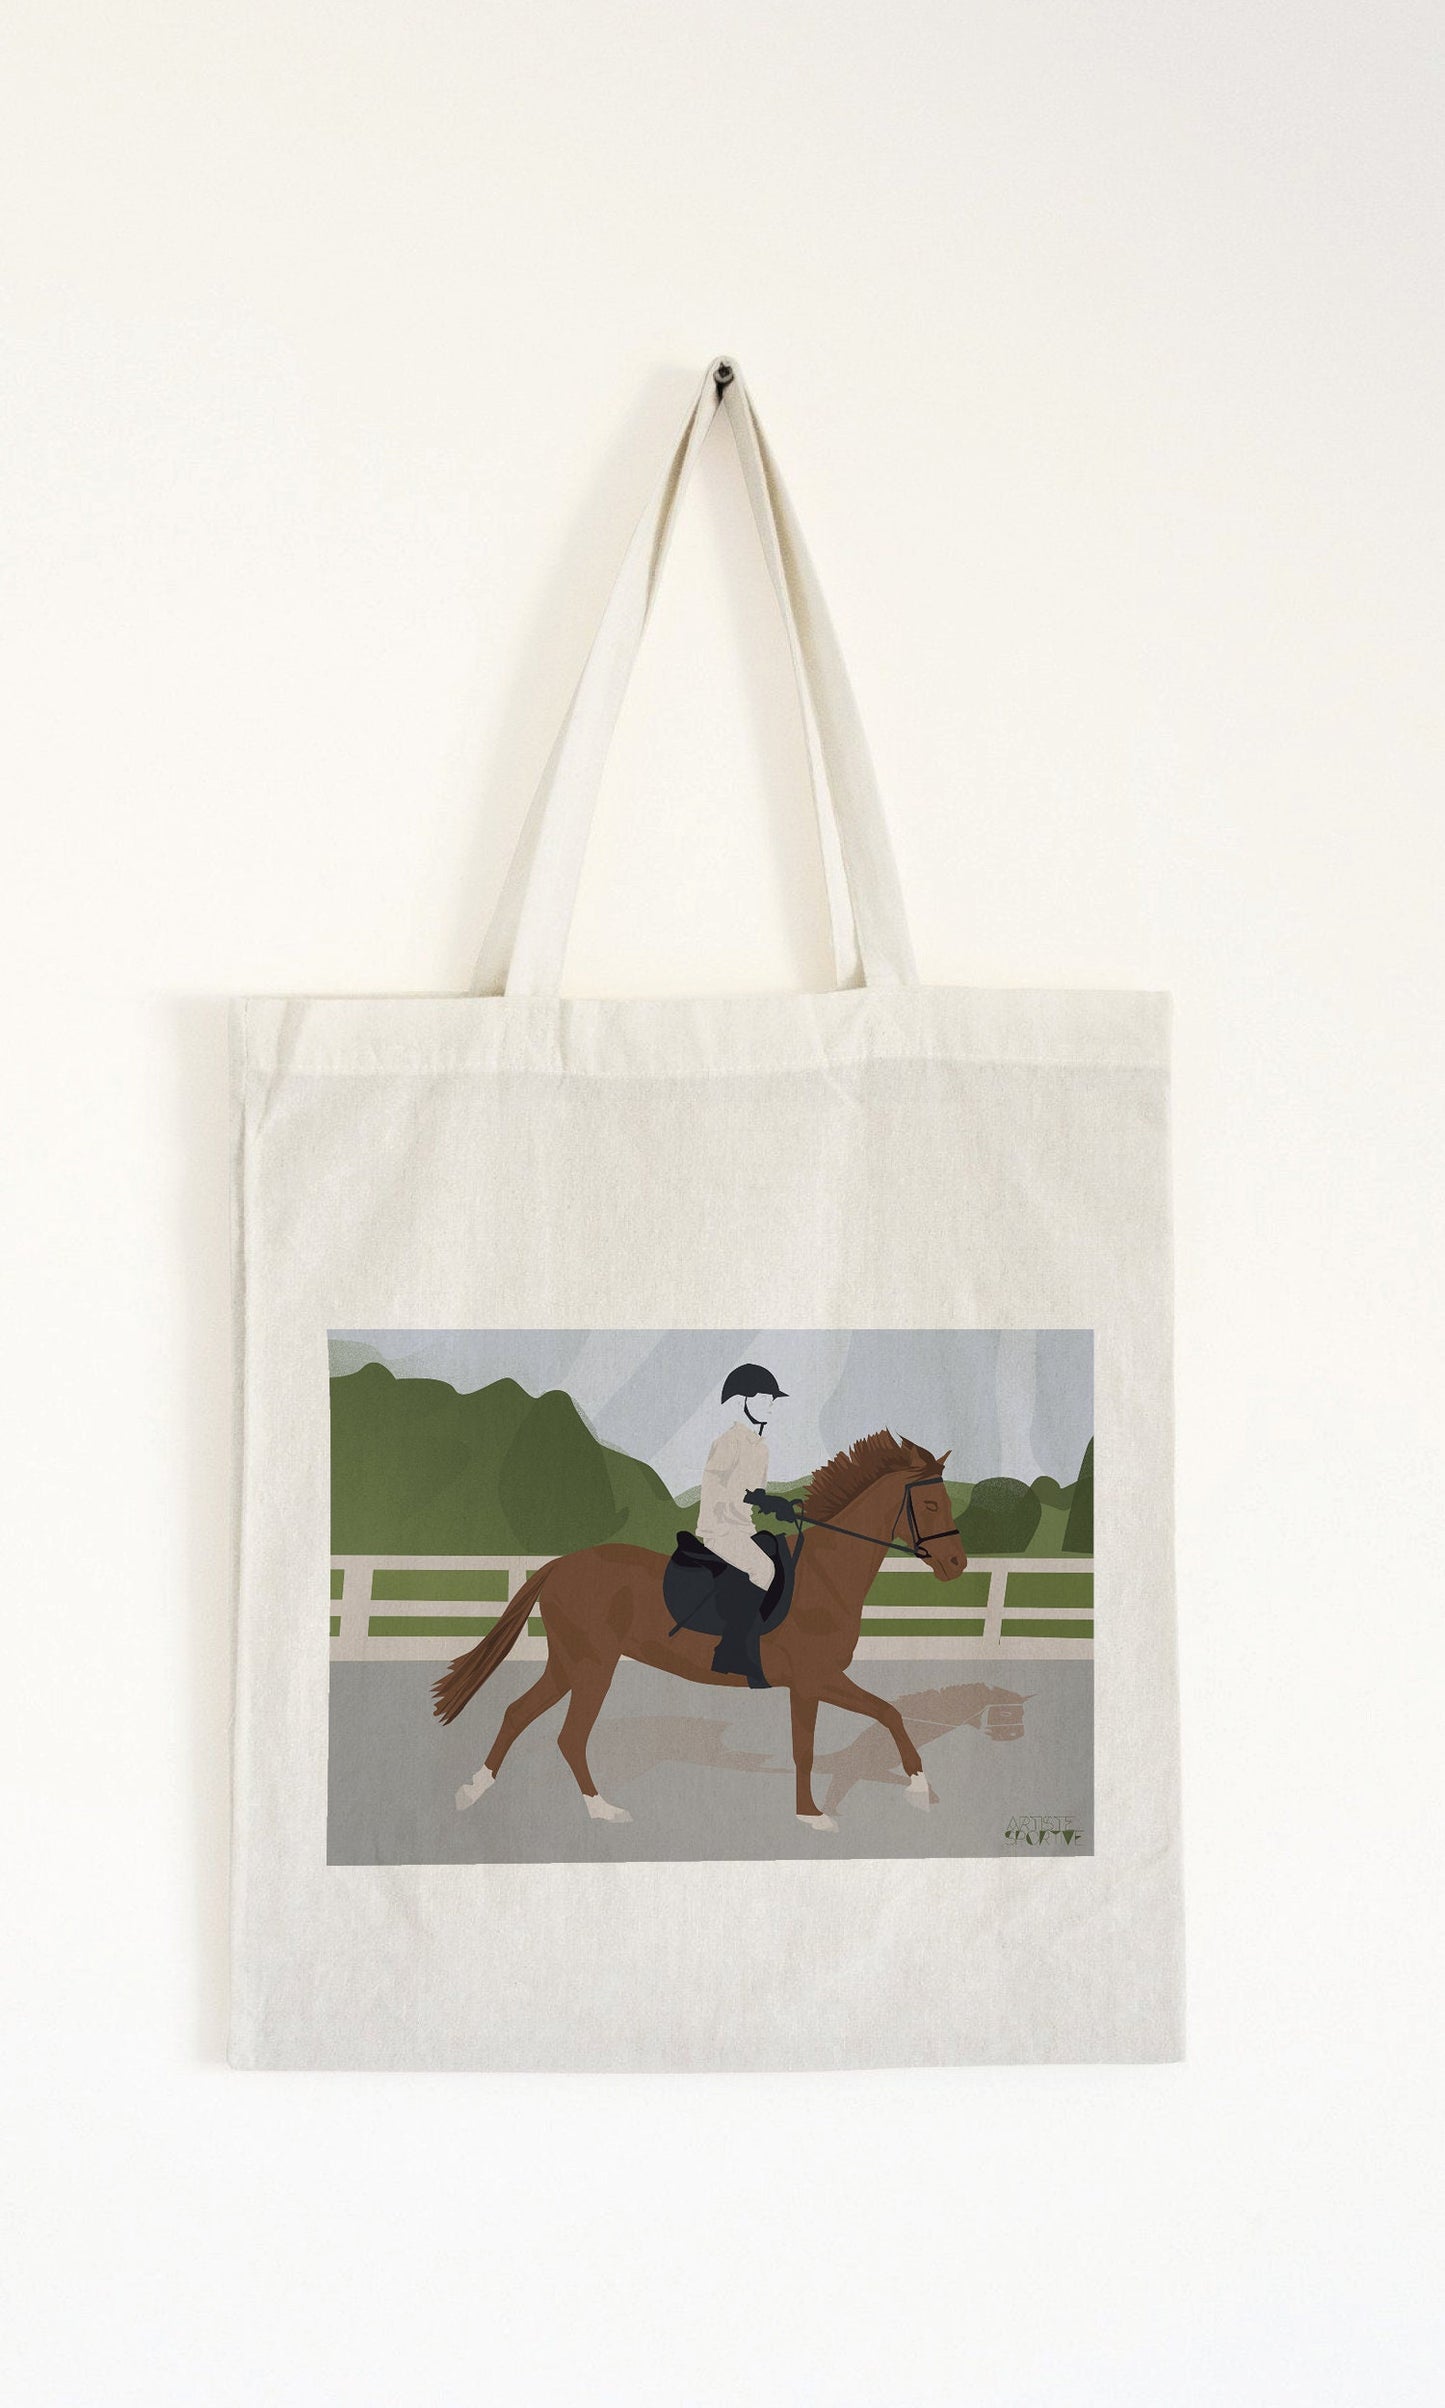 Tote bag or riding bag "On the horse"